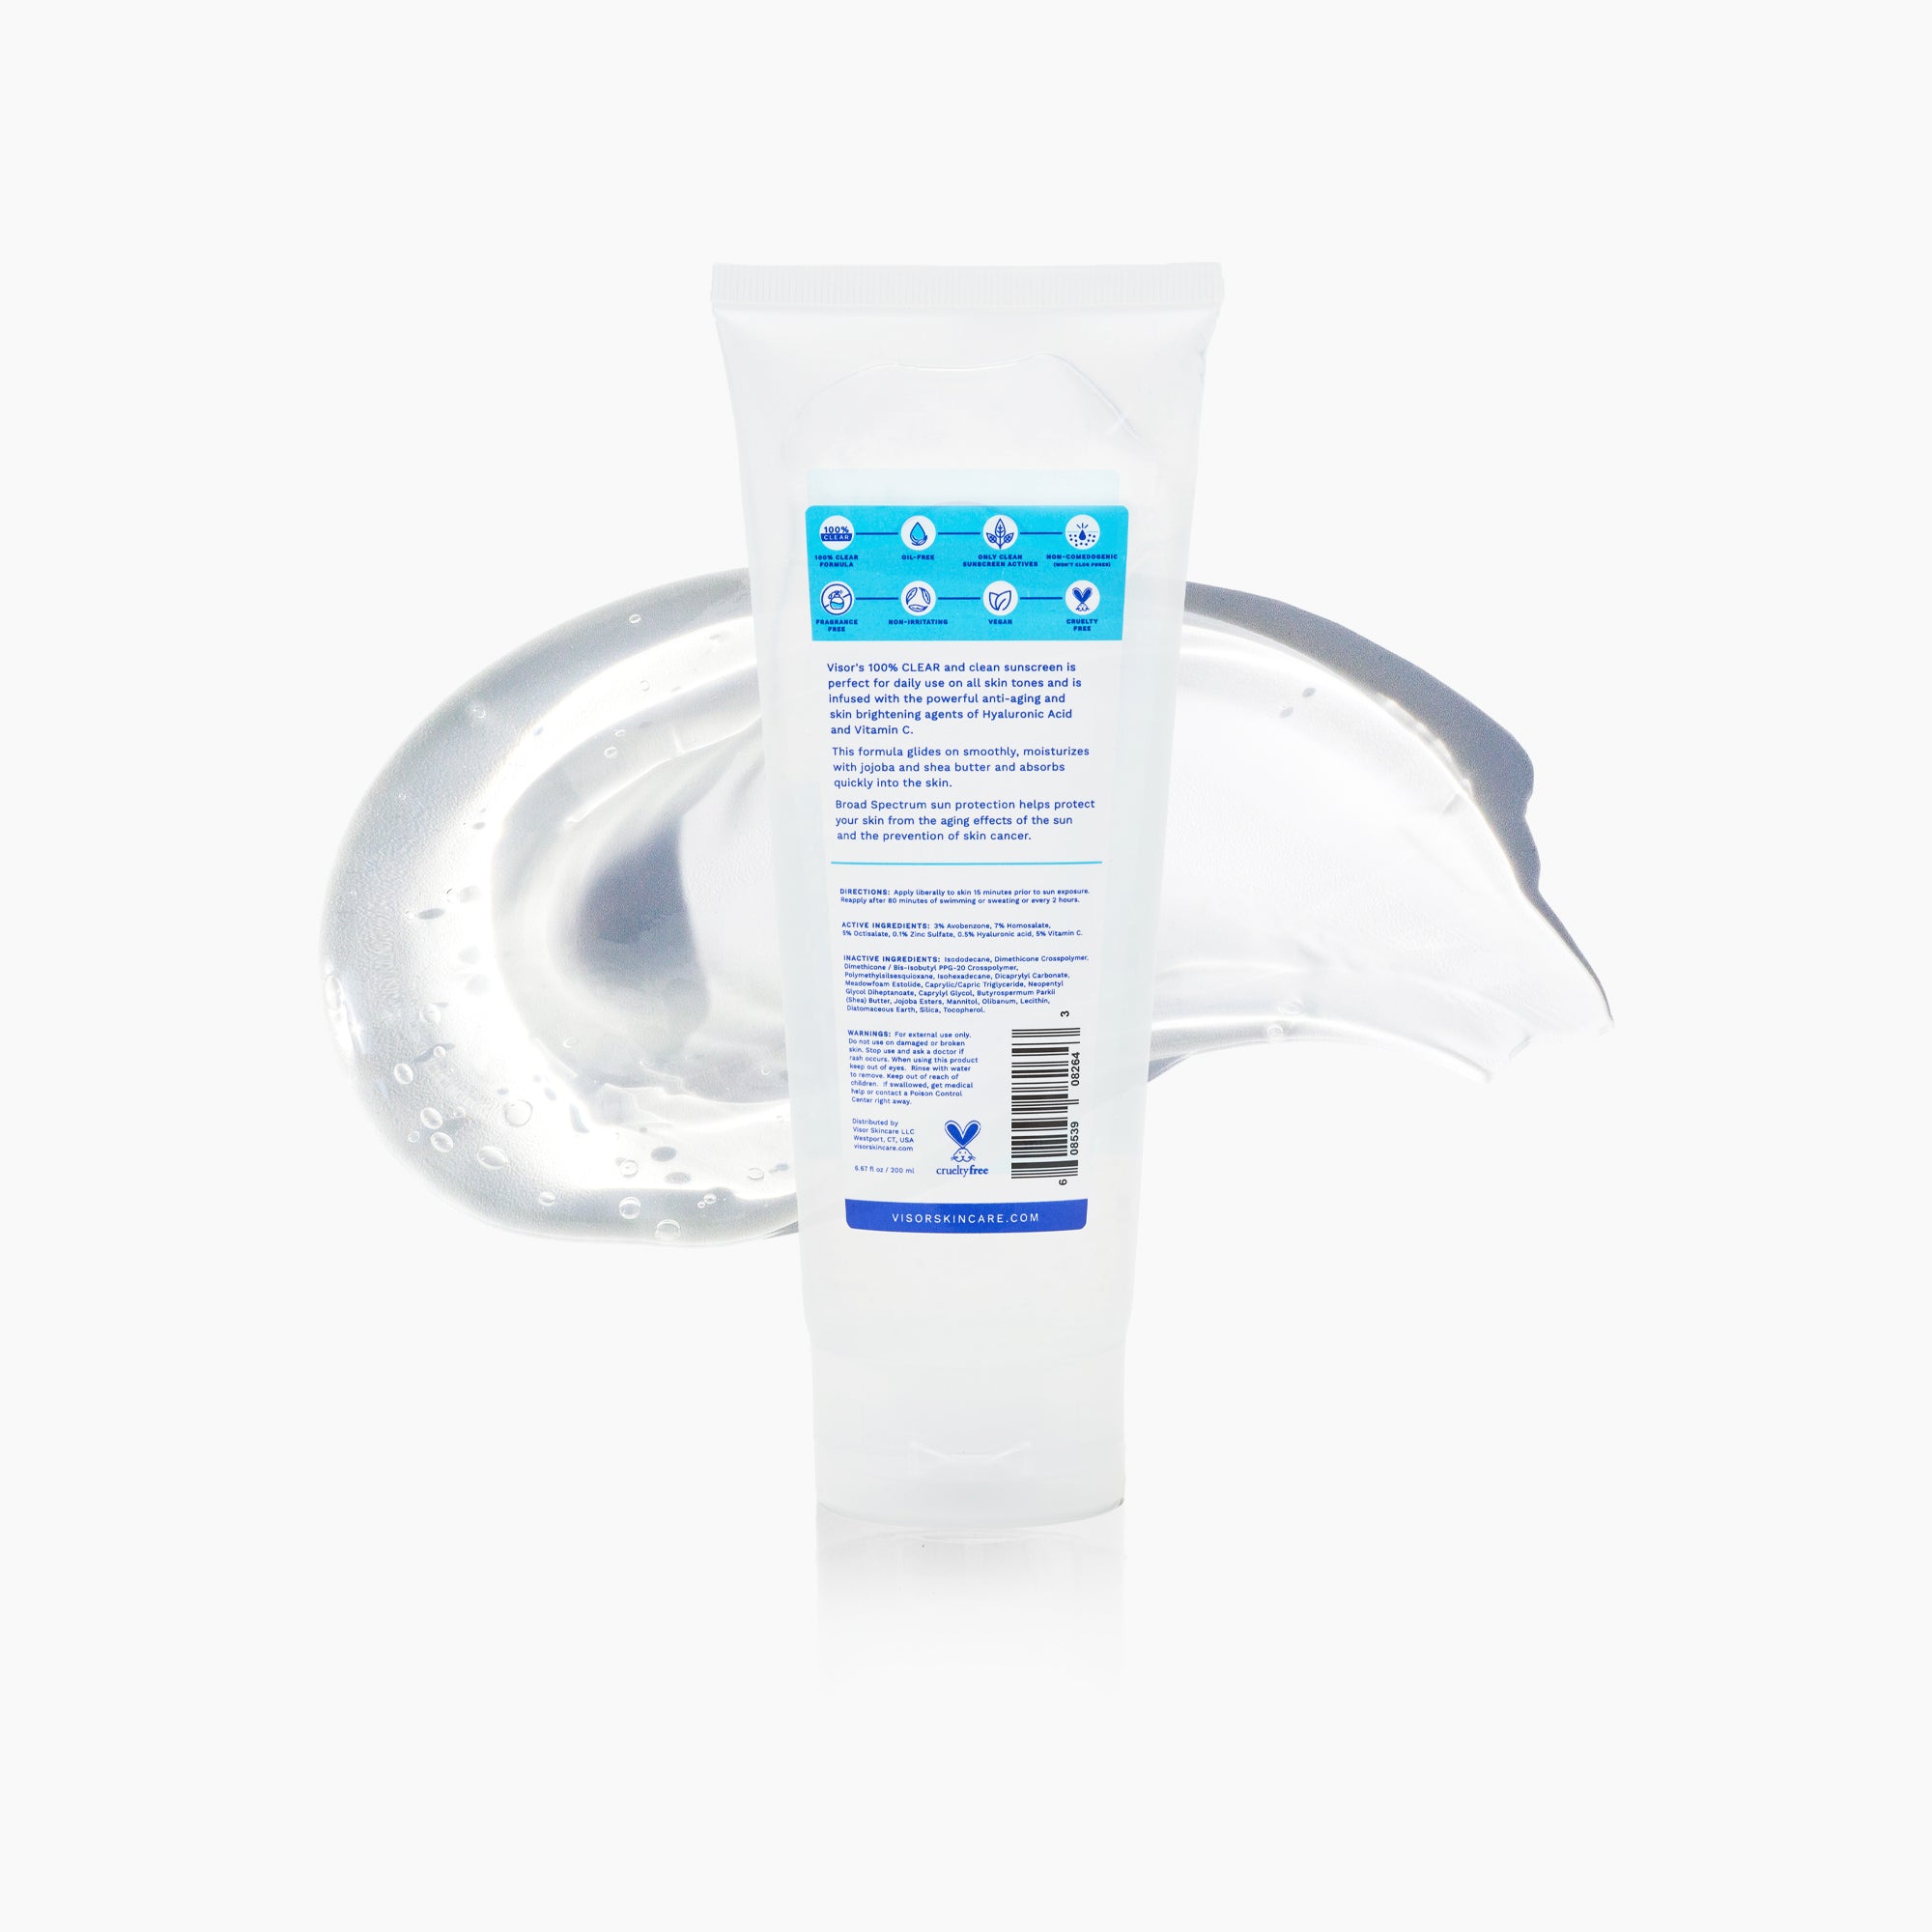 Daily Oil-Free CLEAR Sunscreen